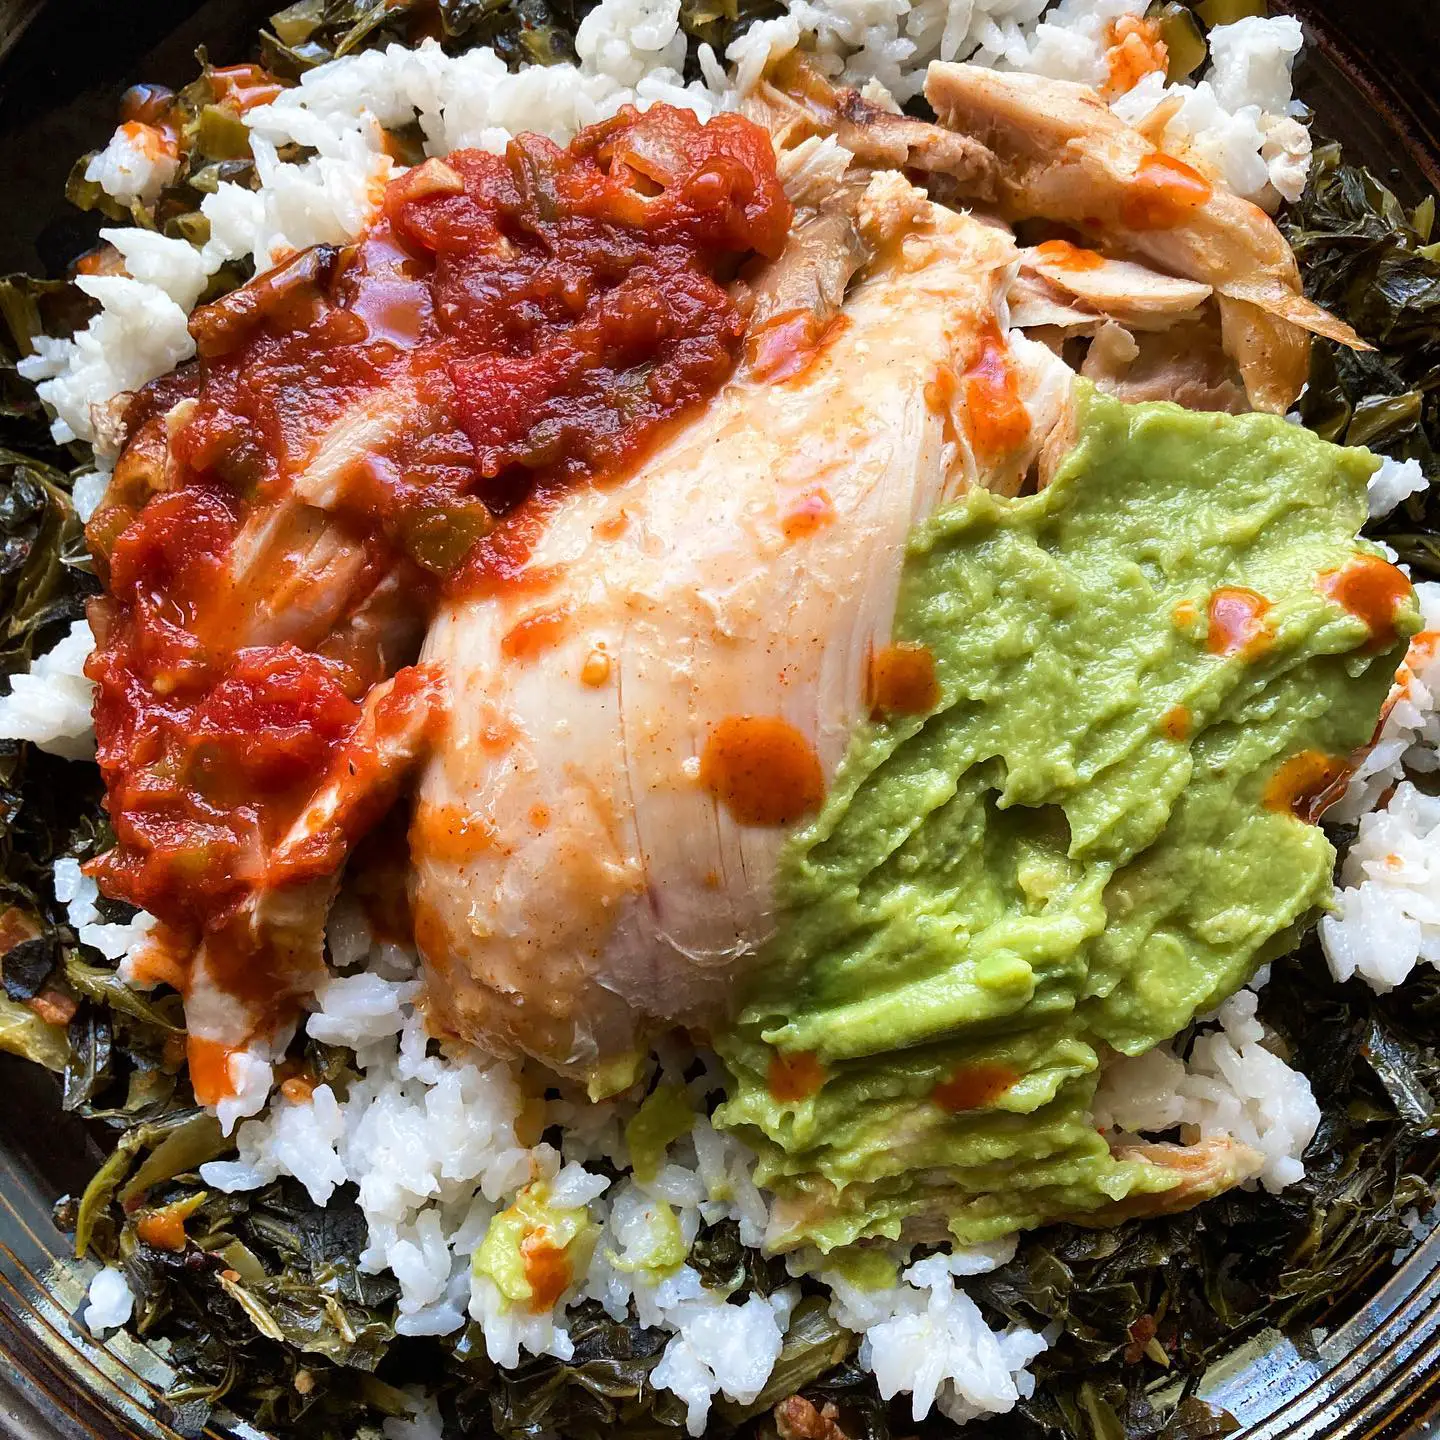 Rotisserie chicken, guacamole, and salsa over a bed of coconut rice that’s sitting on a huge helping of collard greens. It’s just a perfect lunch for me 🥙 . . . . . . . #lunchtime #rotisseriechicken #guacamole #eathealthy #eathealthyfood #deliciousfood #instayum #foodporn #foodpic #foodphotography #collardgreens #soulfood #comfortfood #blackfoodie #blackfoodbloggers #onmytable #whatsforlunch